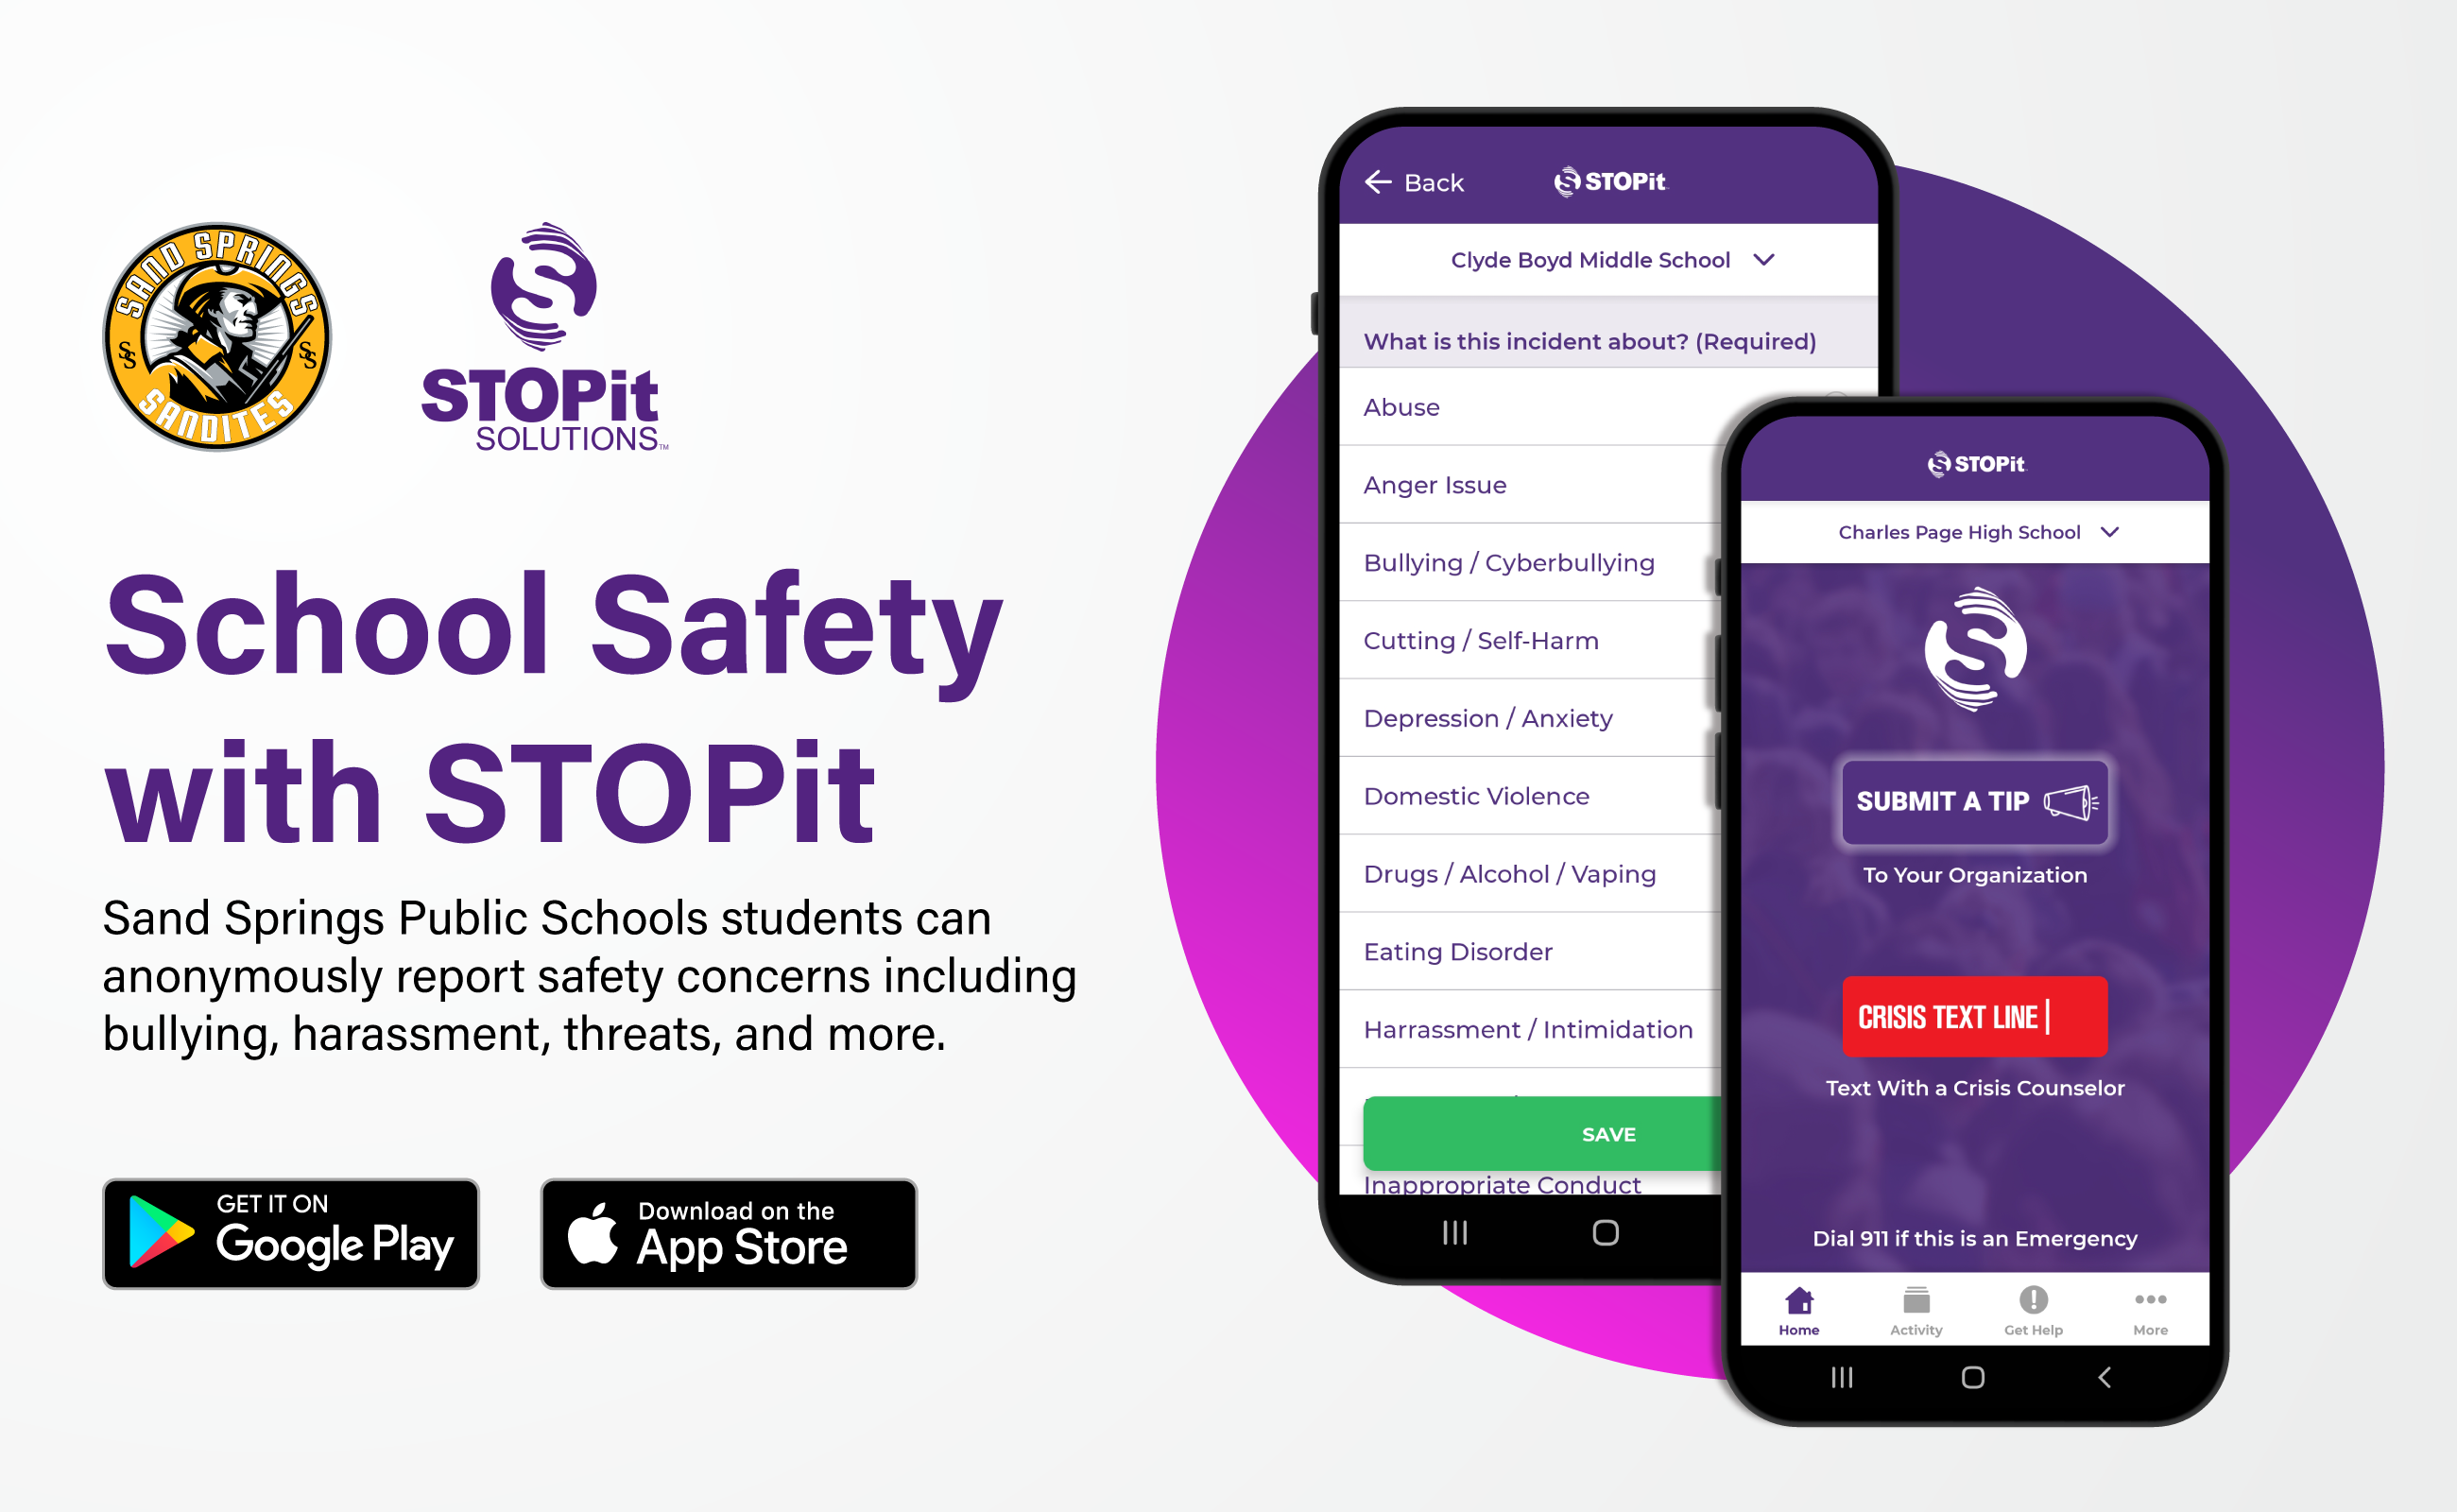 School Safety with STOPit. Sand Springs Public Schools students can anonymously report safety concerns including bullying, harassments, threats, and more.